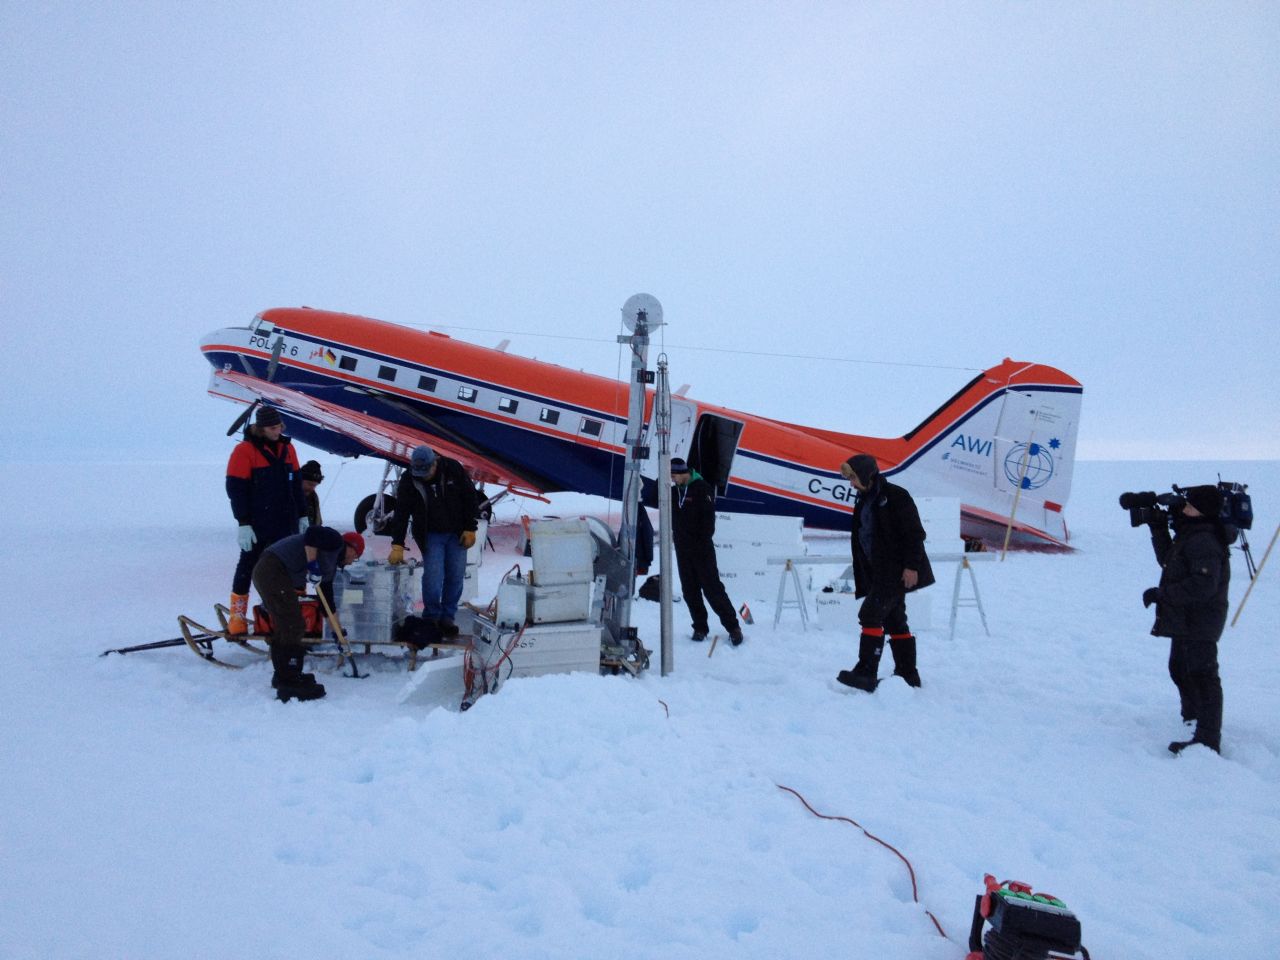 The crew at an ice core drill site after landing safely on the ice. The drilling has to be performed at night because the surface is so slushy from ice melt during daylight that the plane would sink in and get stuck.